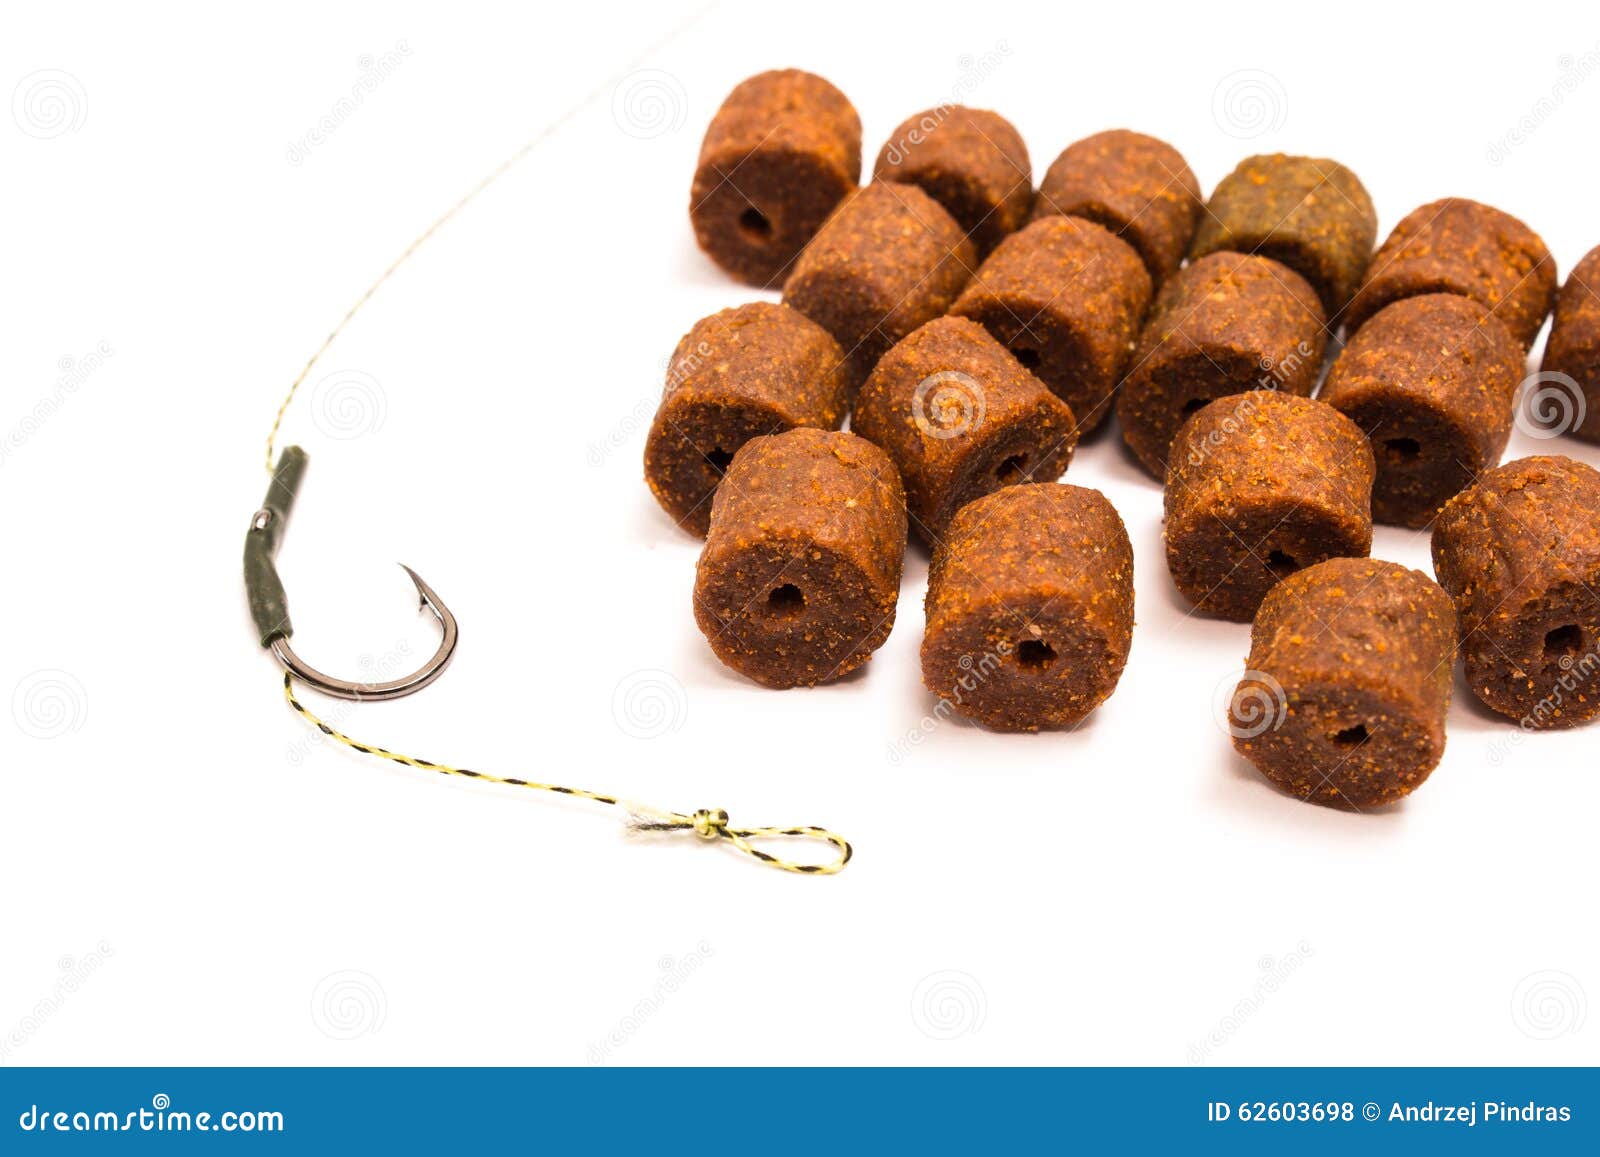 Pellet - Carp Fishing Bait and Accessories Stock Photo - Image of